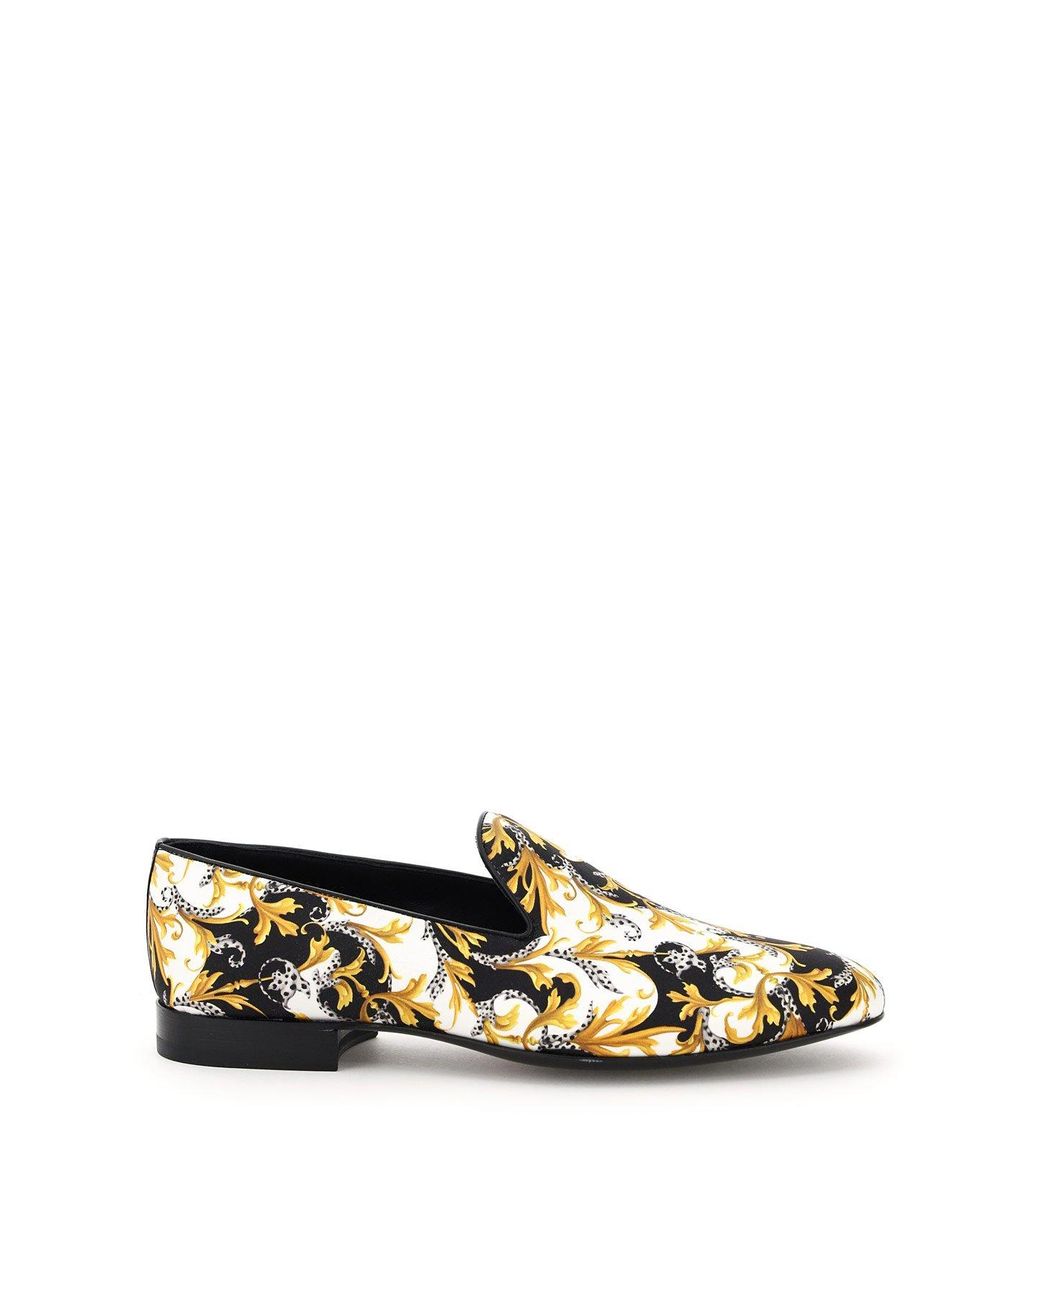 Versace Silk Barocco Print Loafers for Men - Lyst